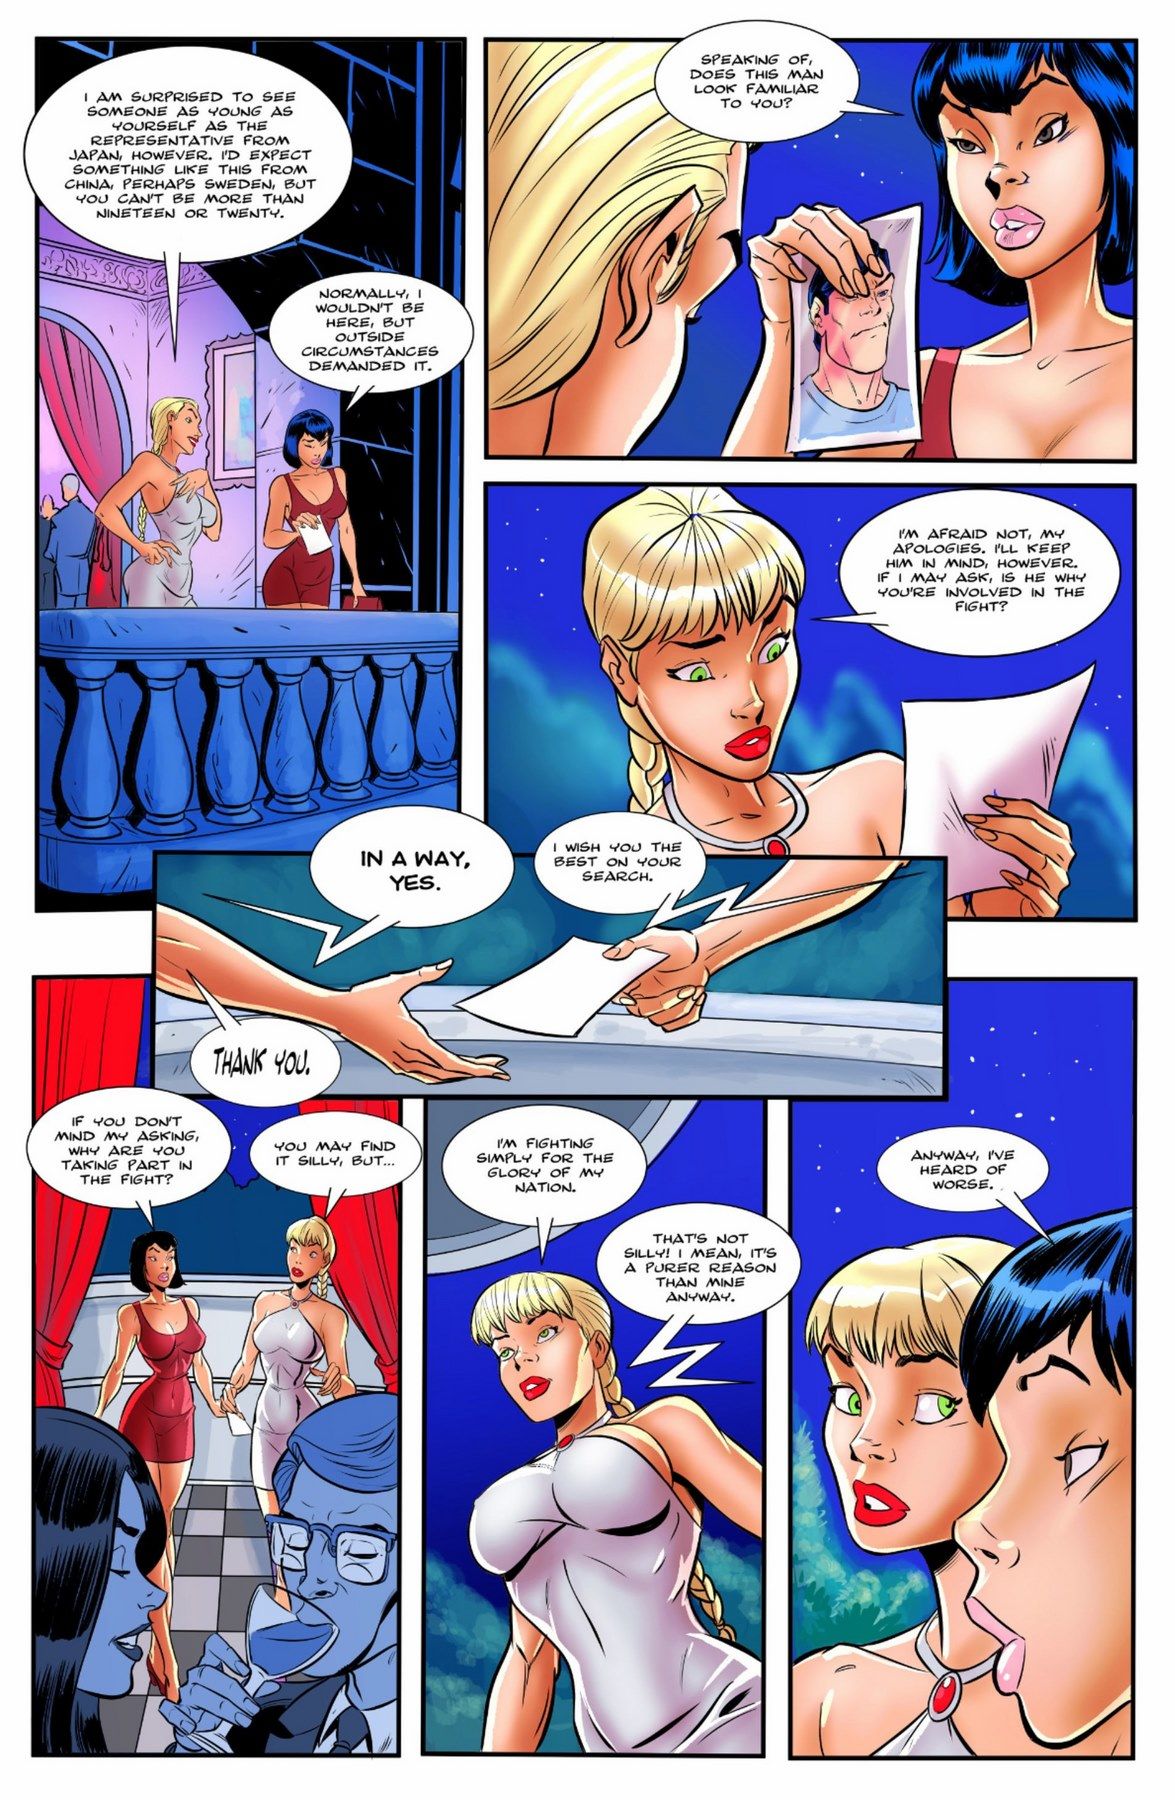 The Giantess Fight Round One Issue 3 page 7